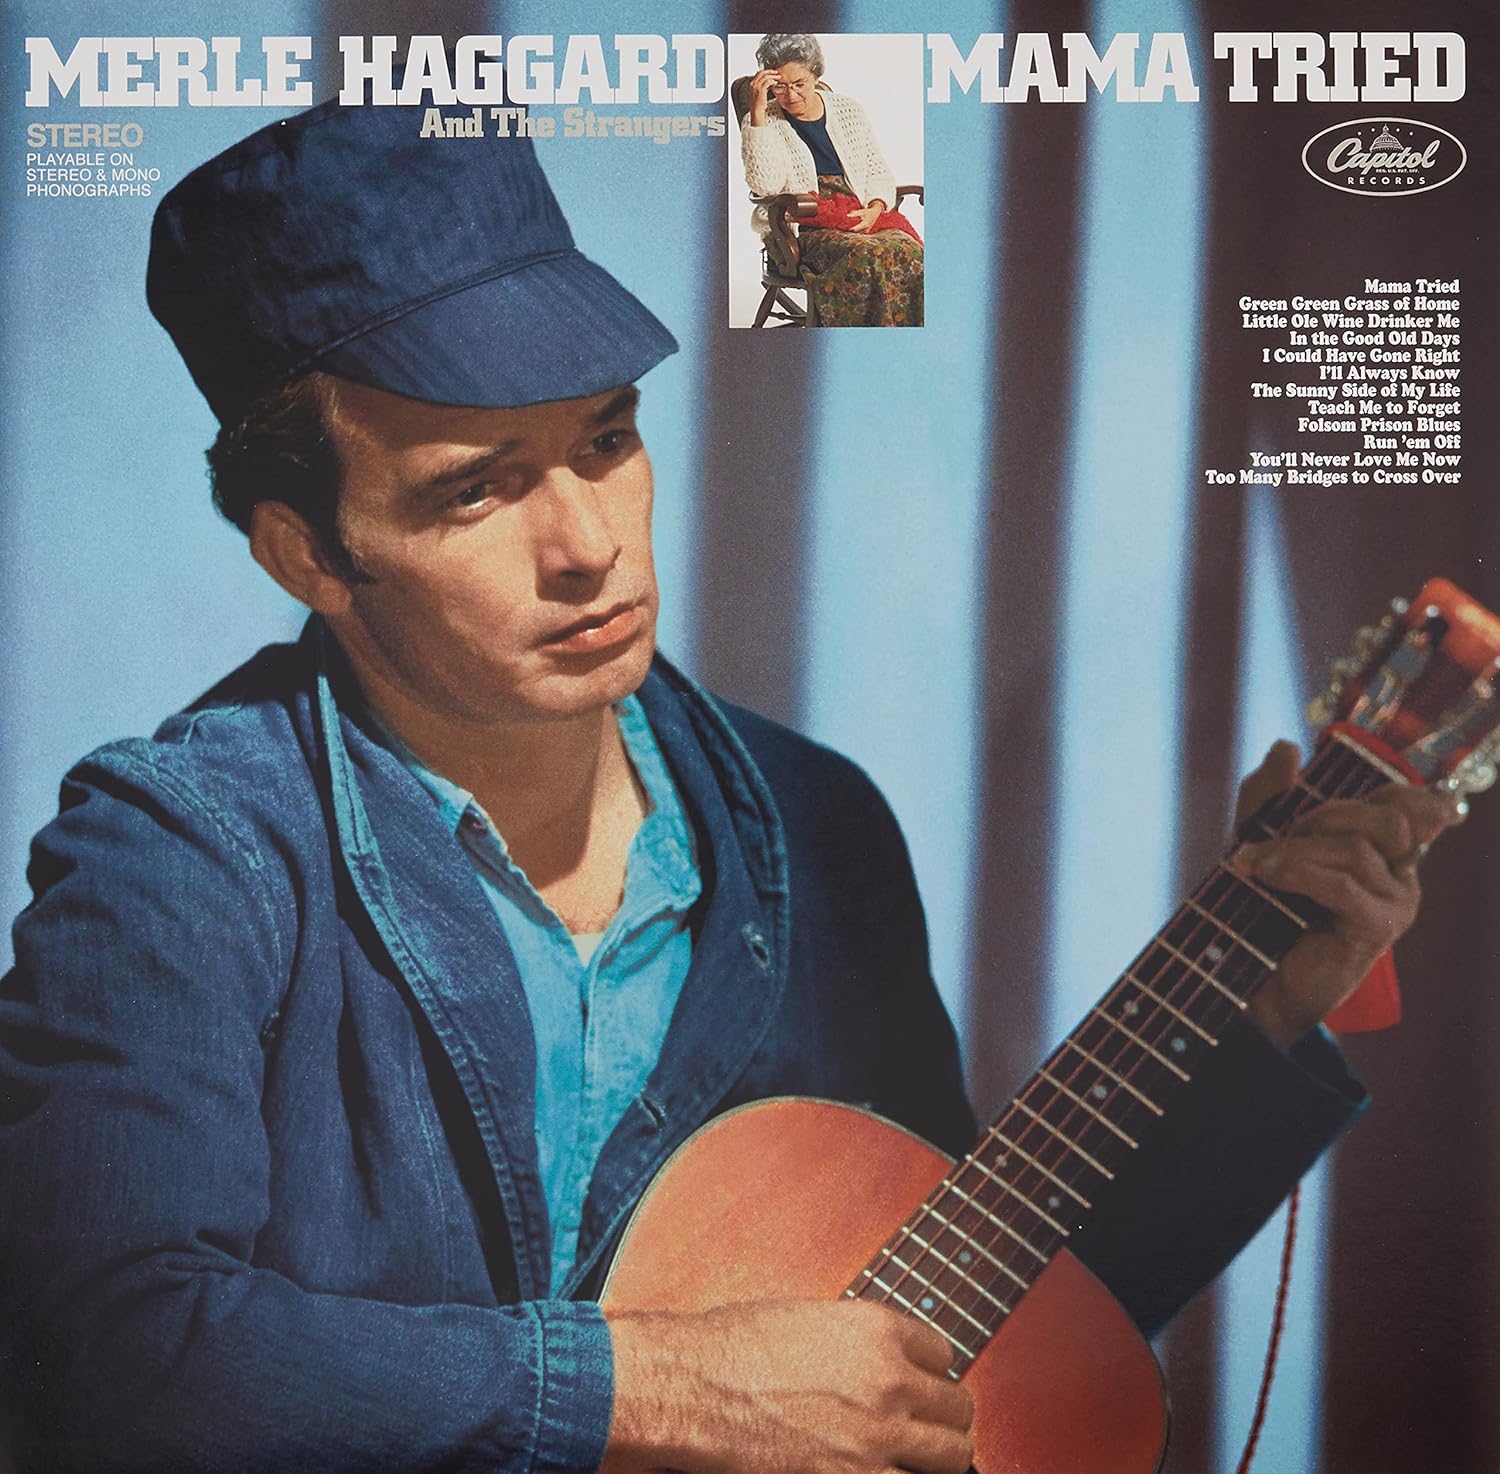 The Bard of Bakersfield: How Merle Haggard Shaped the Sound of Americana